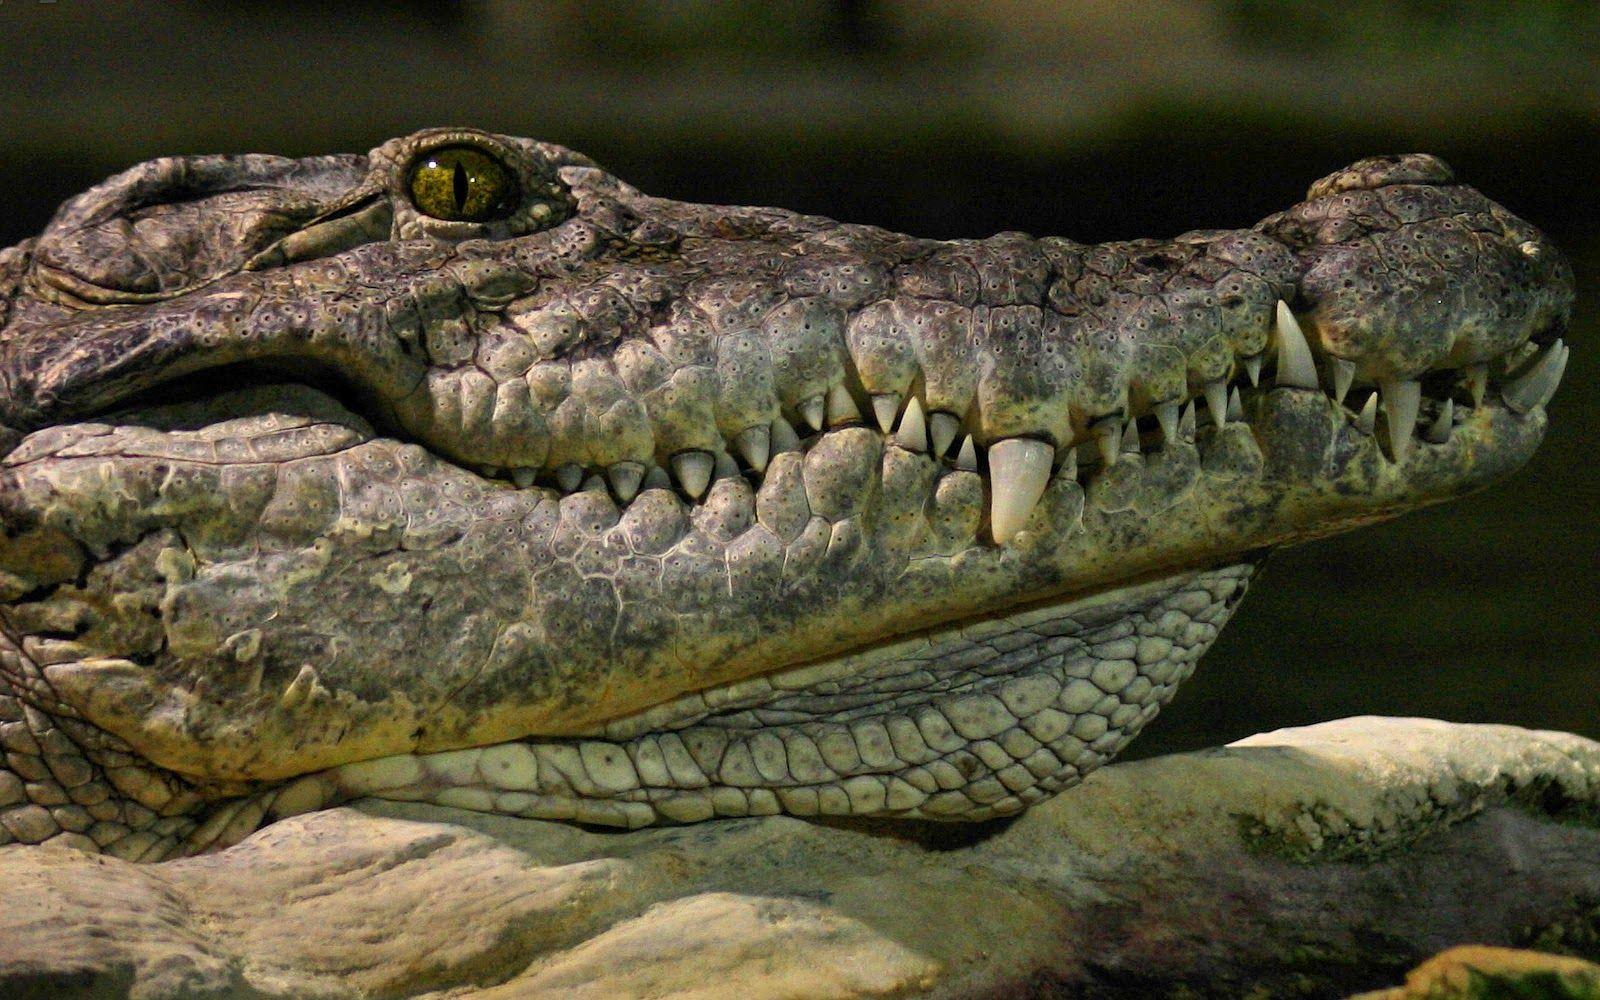 Android Phones Wallpaper: Android Wallpaper Crocodile